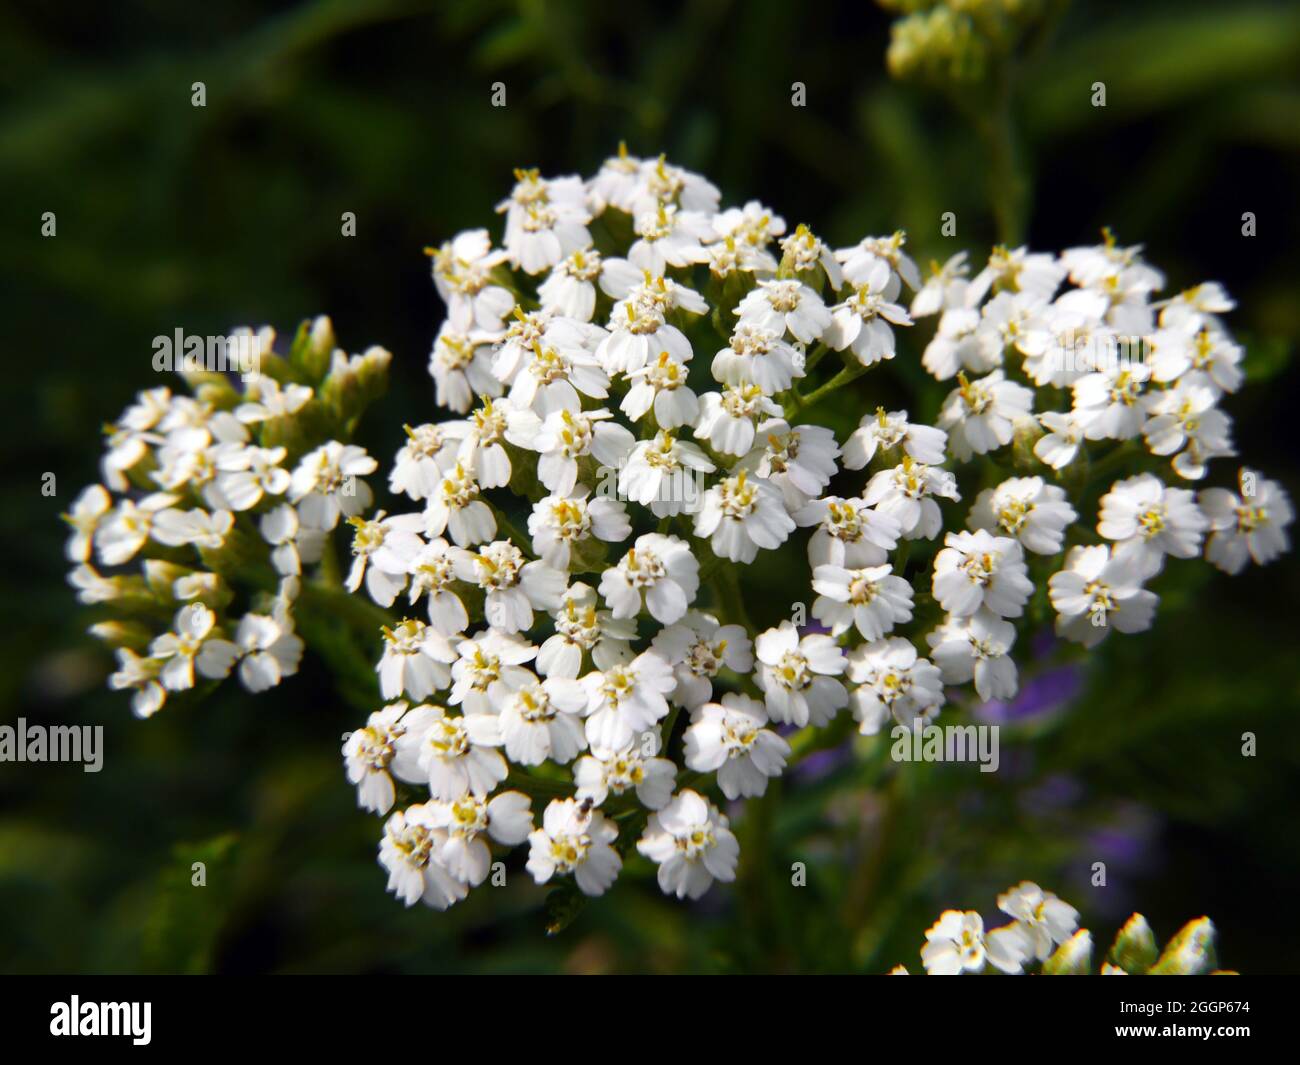 Close-up of the tiny white flowers on a common yarrow plant growing in a field. Stock Photo